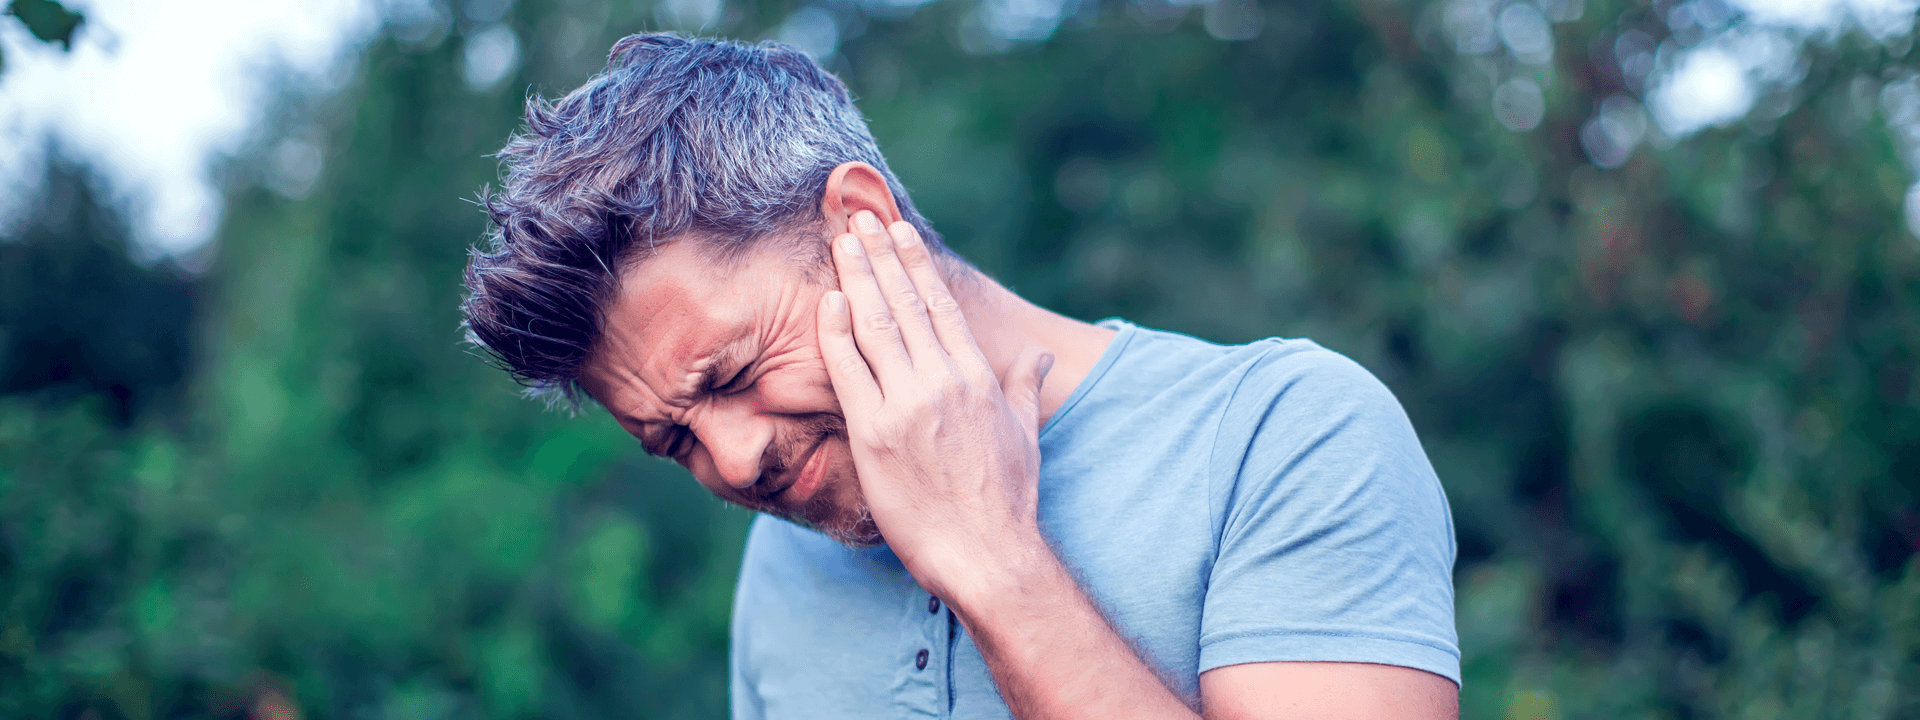 Tinnitus...what is it and what can you do about it?